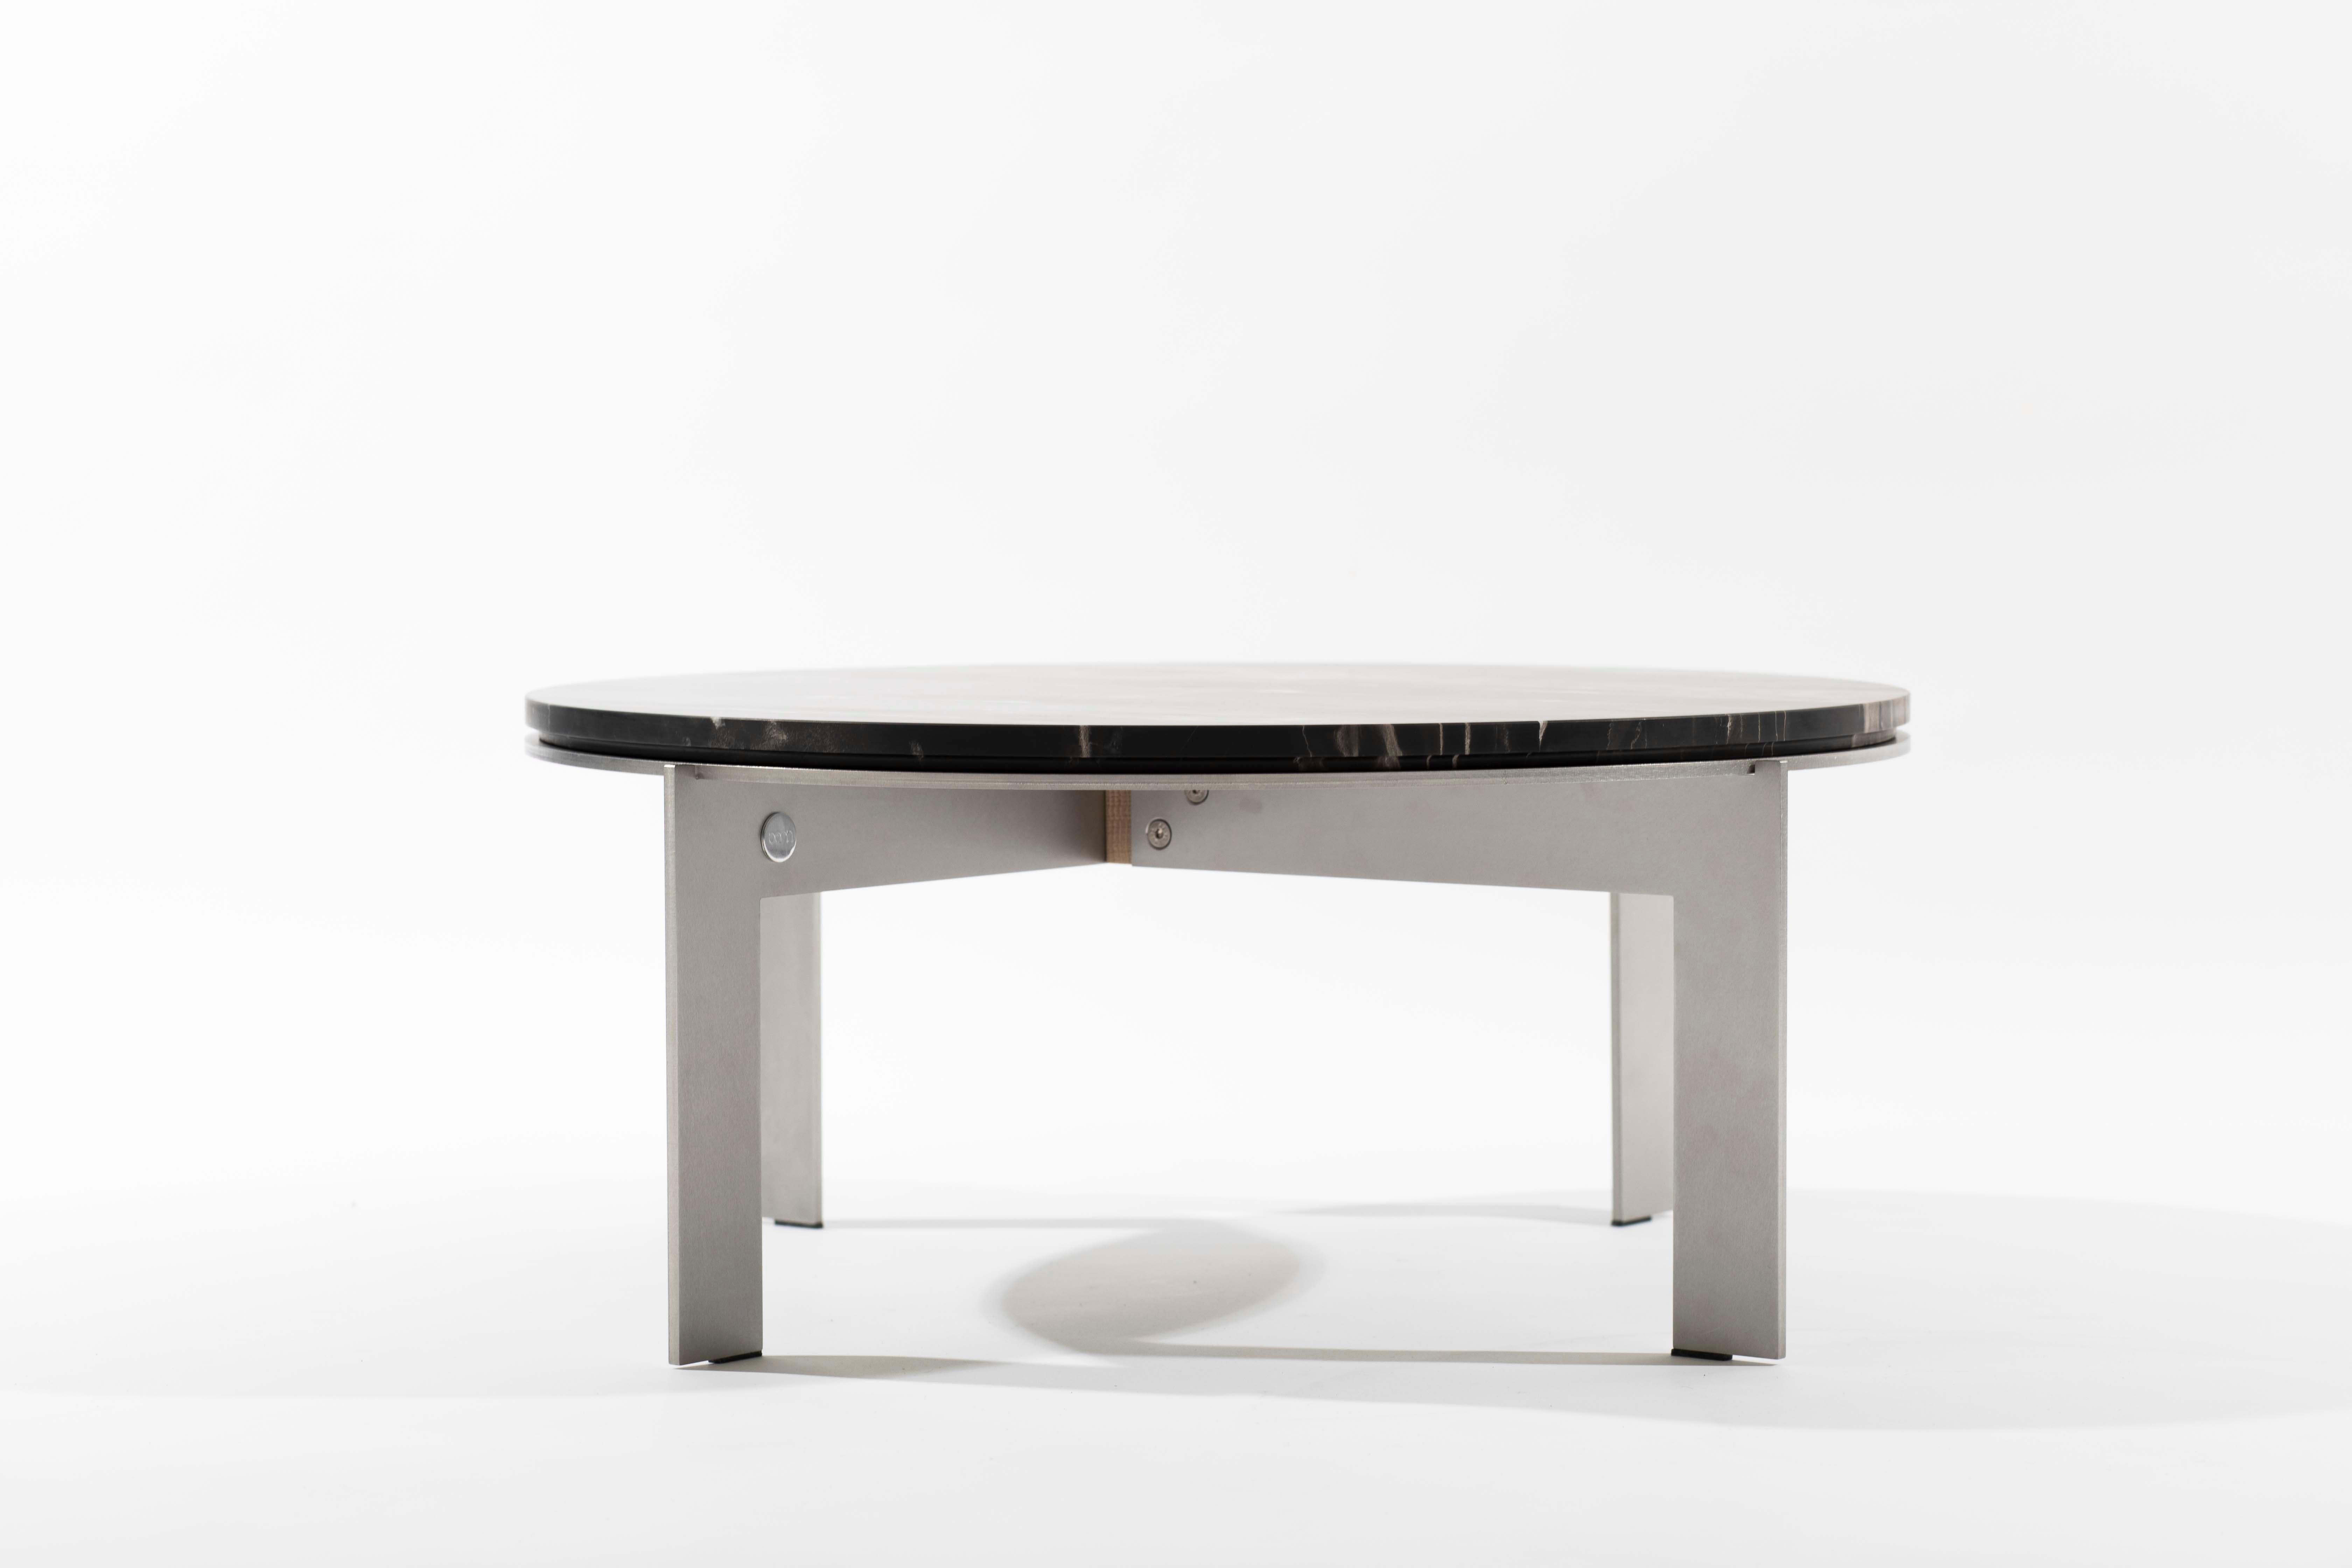 Joined is a collection of side tables. The name speaks for itself. The tables have one thing in common, they all exist around a crucial part, the joint, keeping all pieces together. Available in many shapes and materials. Every model can be finished